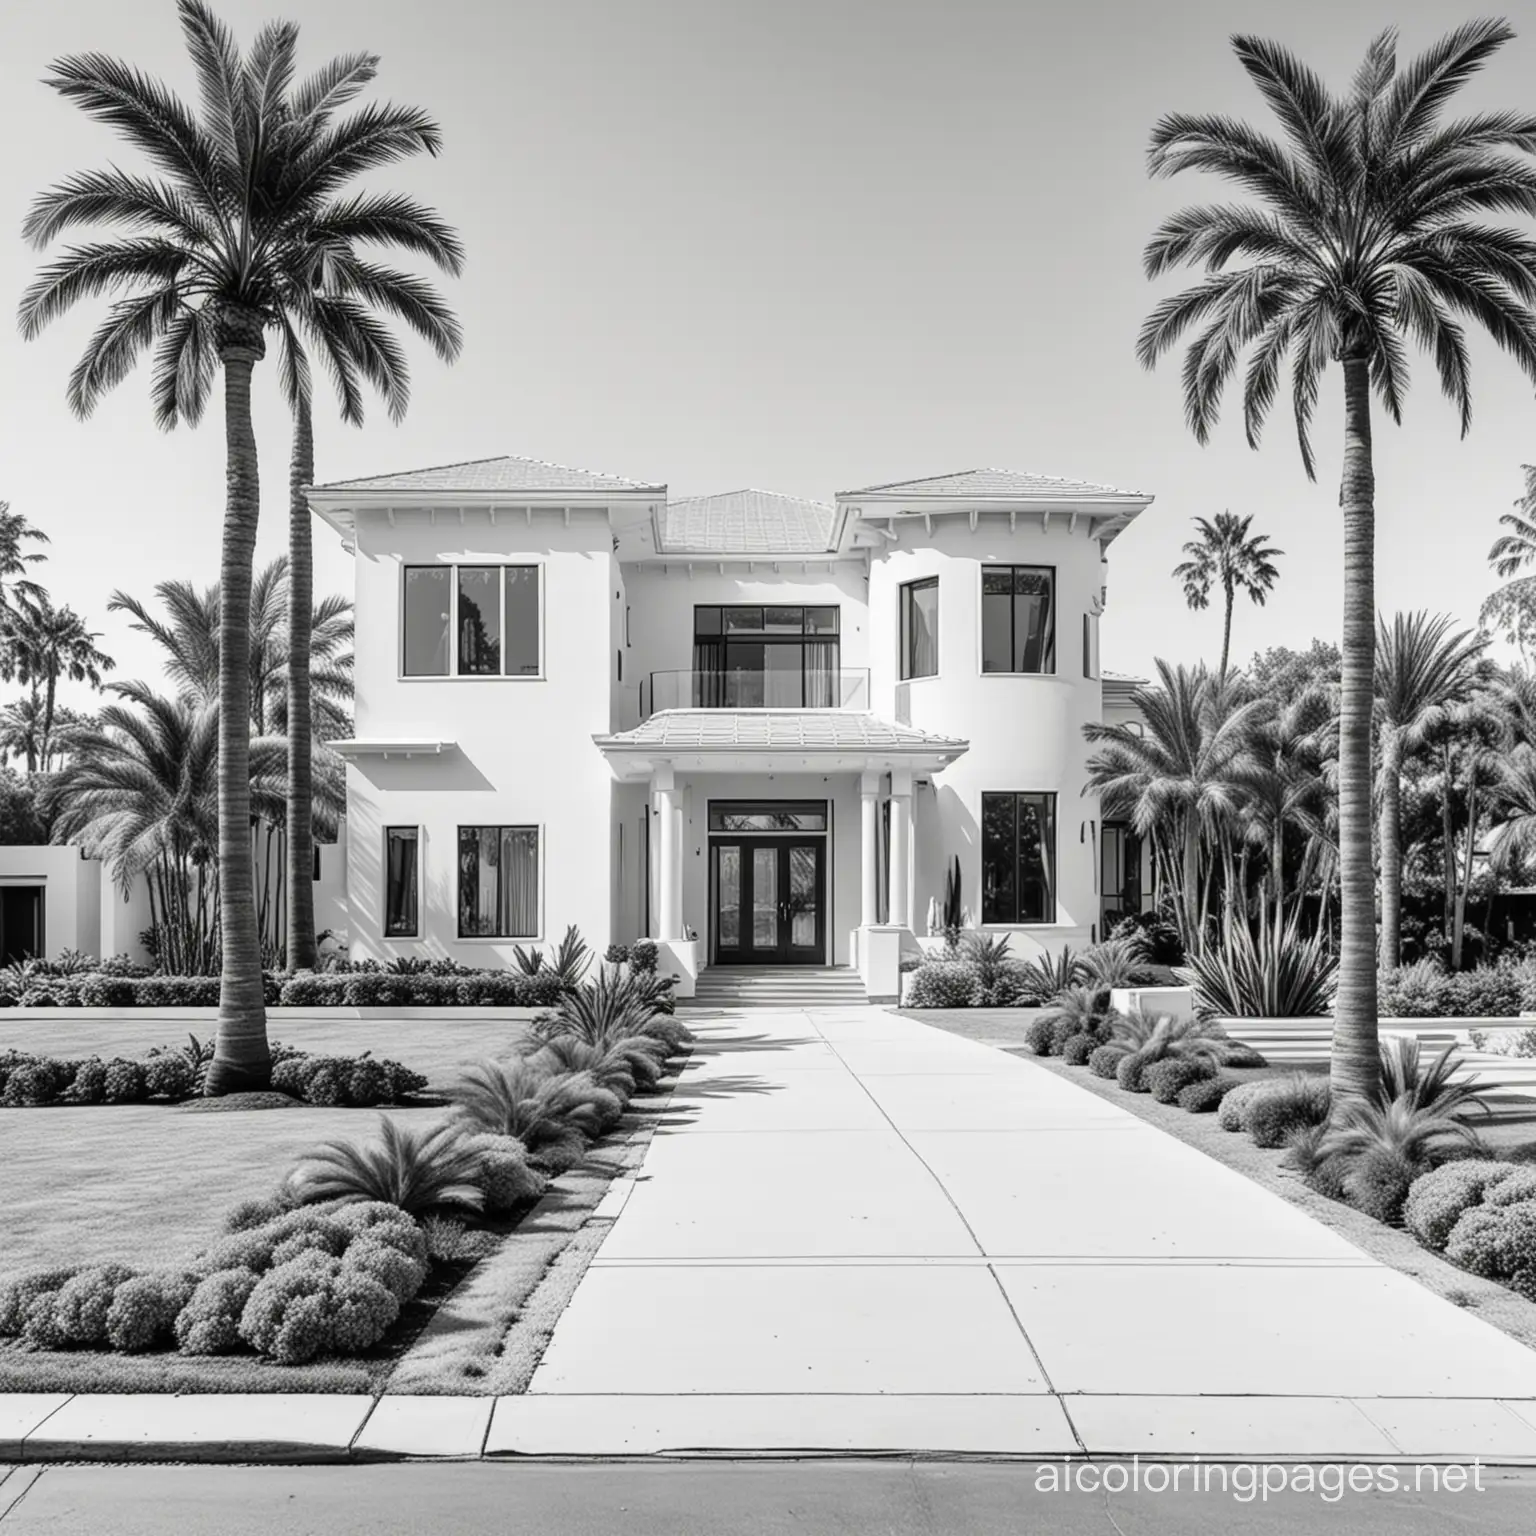 modern mansion with a driveway lined with palm trees, Coloring Page, black and white, line art, white background, Simplicity, Ample White Space. The background of the coloring page is plain white to make it easy for young children to color within the lines. The outlines of all the subjects are easy to distinguish, making it simple for kids to color without too much difficulty